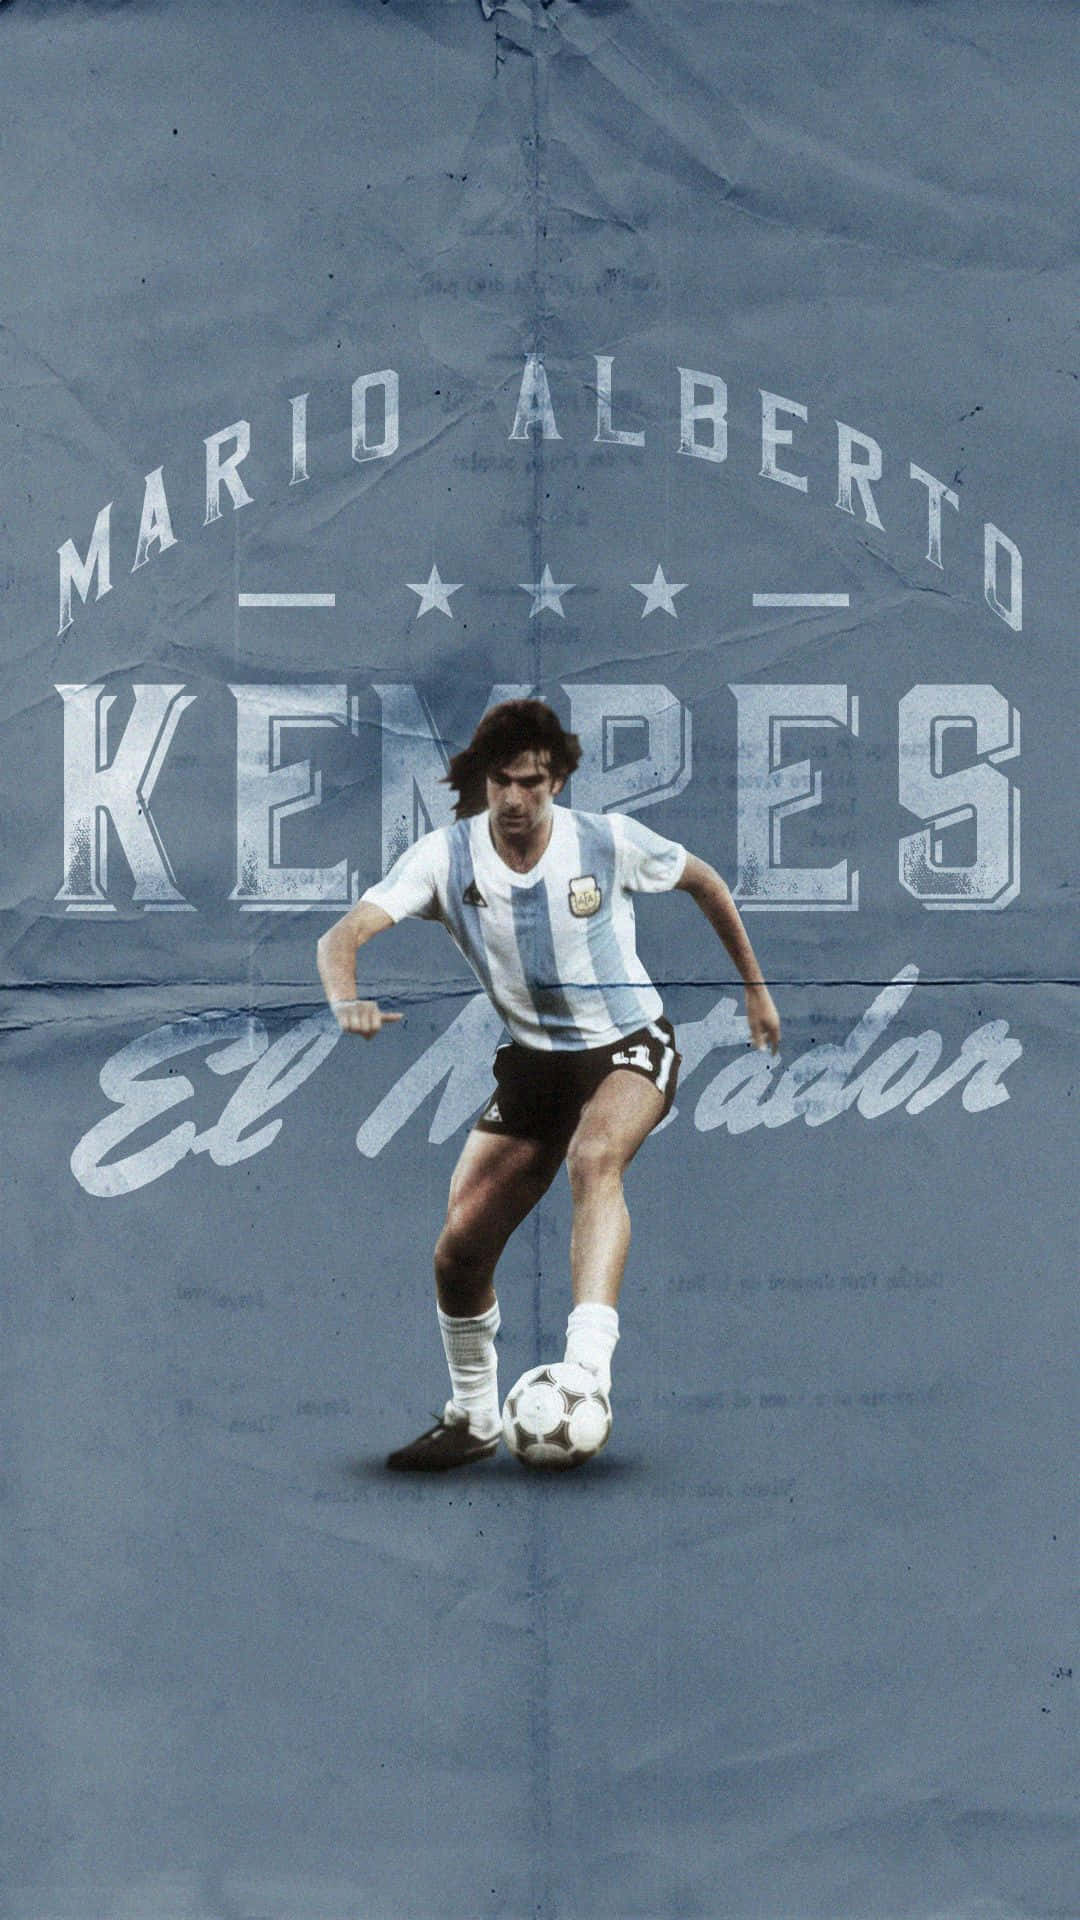 Legendary football player, Mario Kempes in action Wallpaper